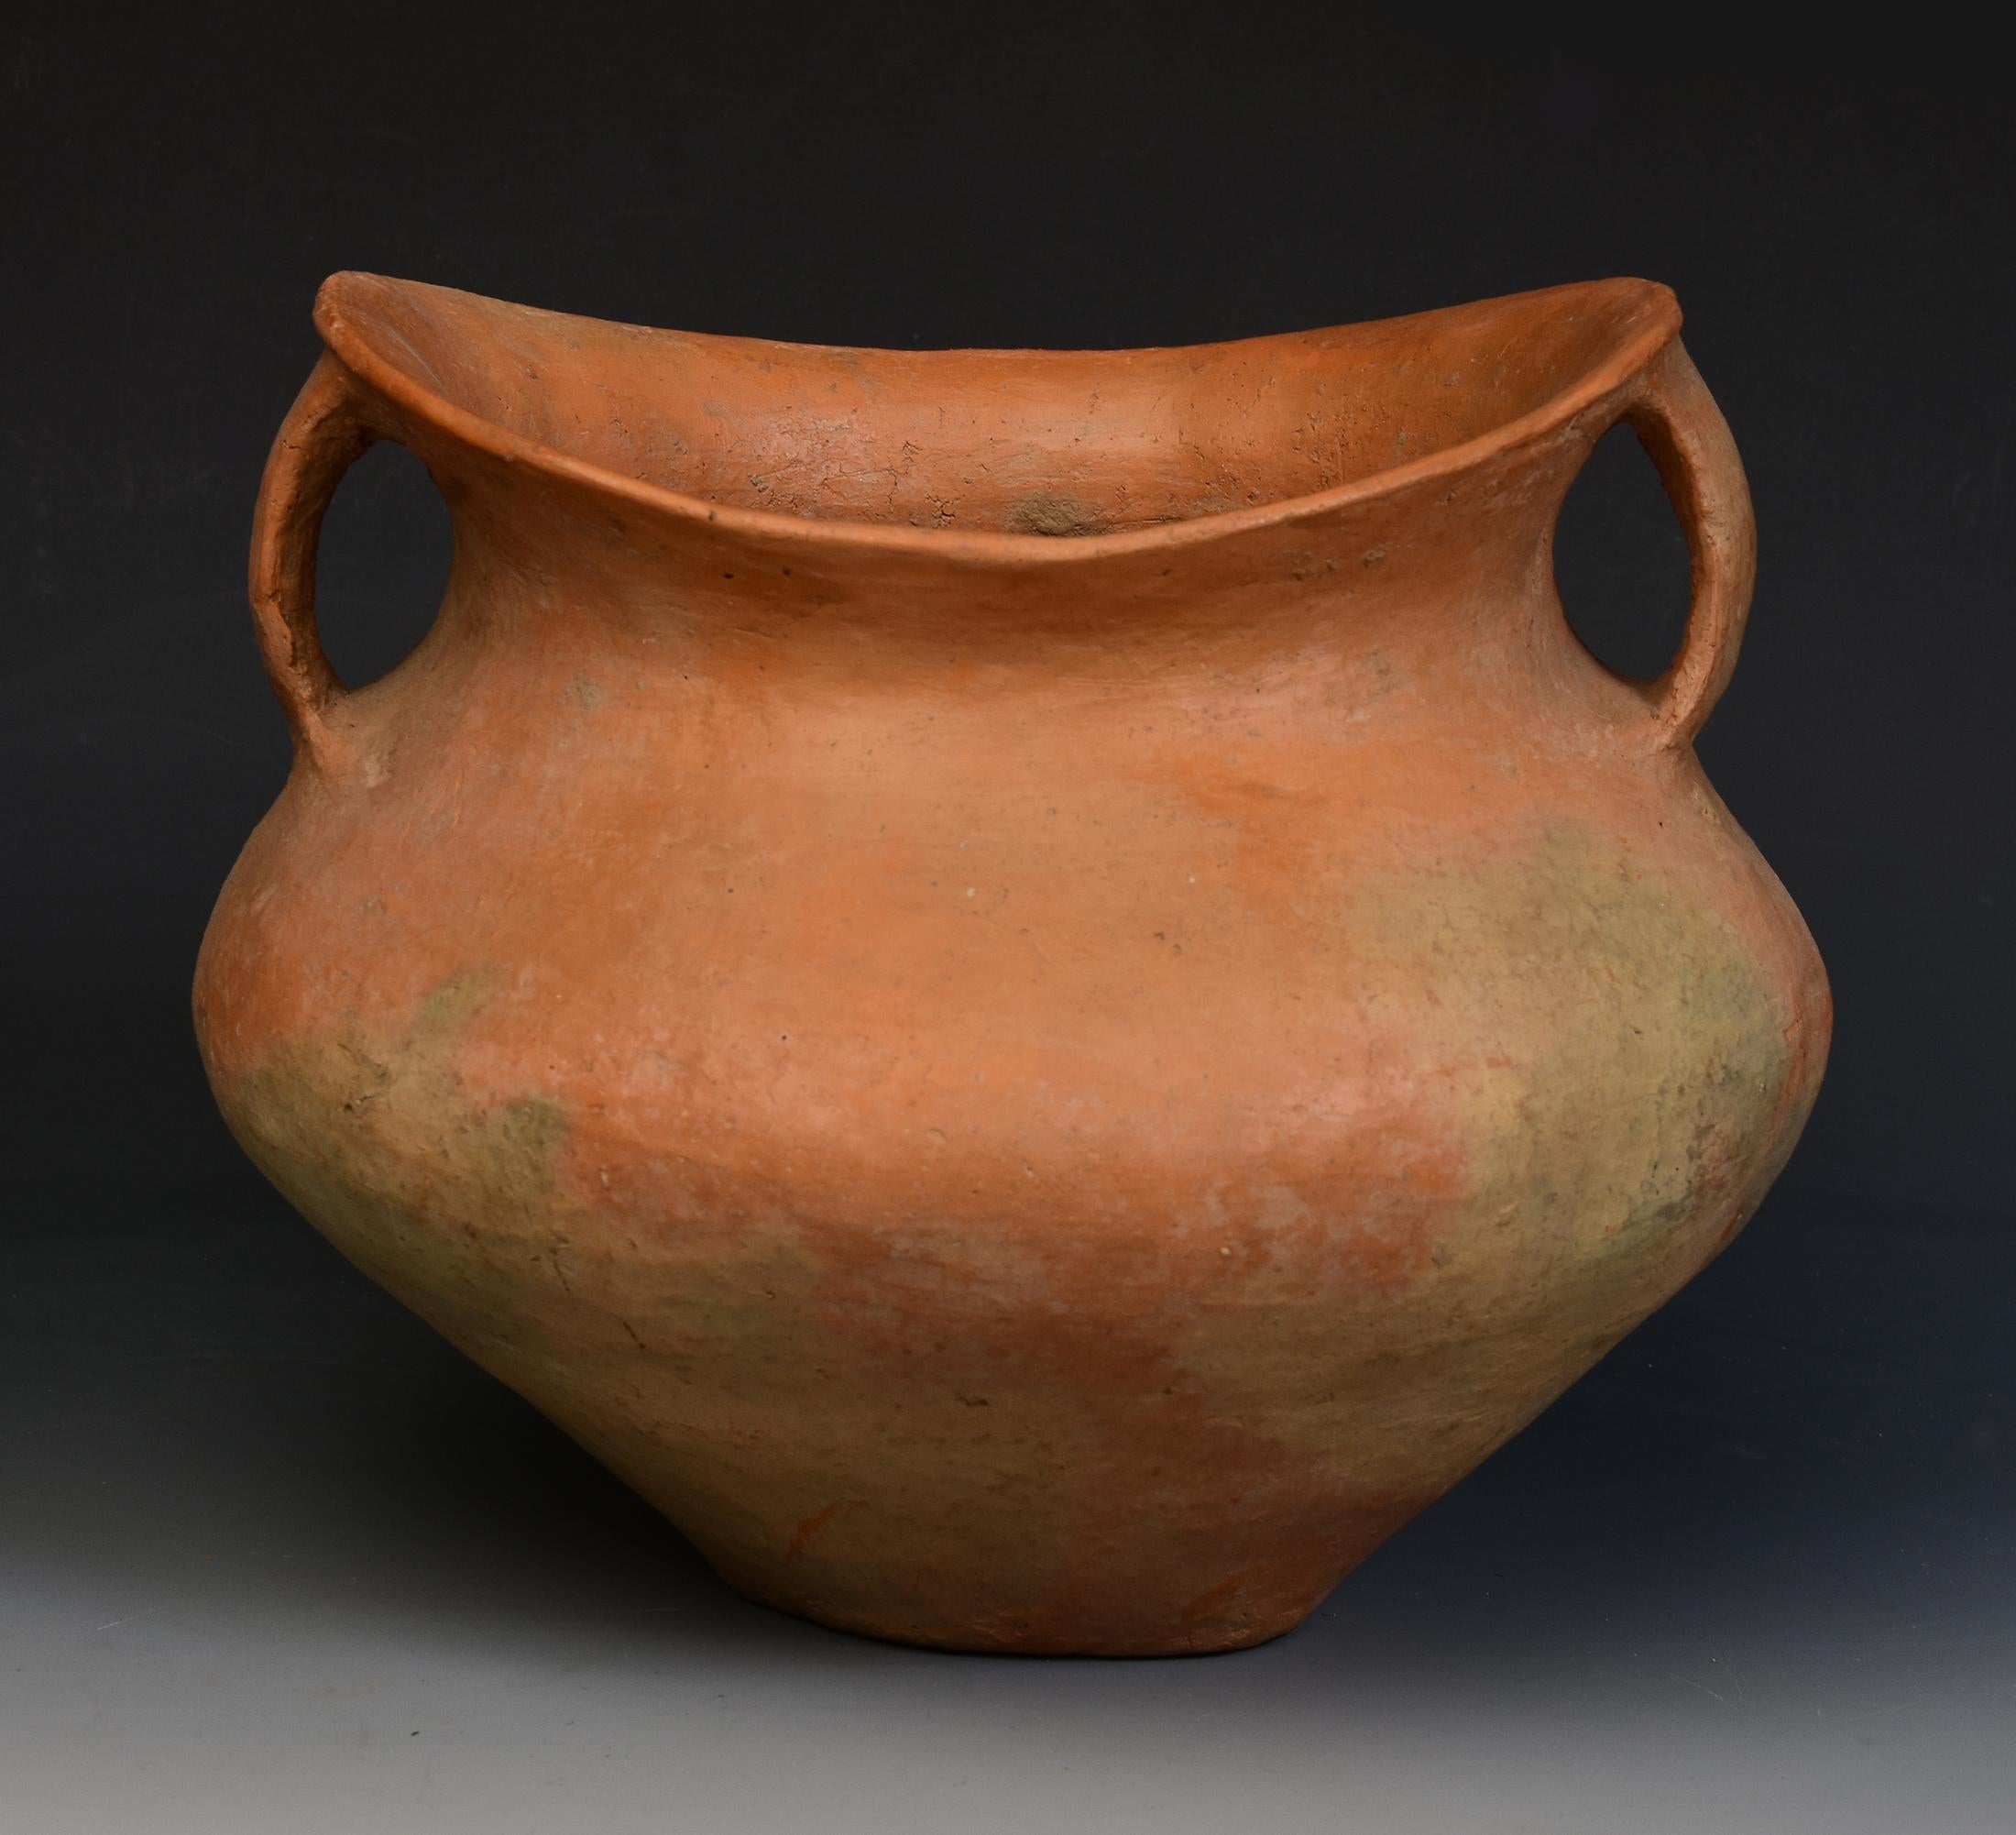 Antique Chinese Neolithic Siwa culture pottery Amphora jar.

Age: China, Neolithic period, 1350 B.C.
Size: Height 17.8 C.M. / Width 21 C.M.
Condition: Well-preserved old burial condition overall.

100% satisfaction and authenticity guaranteed